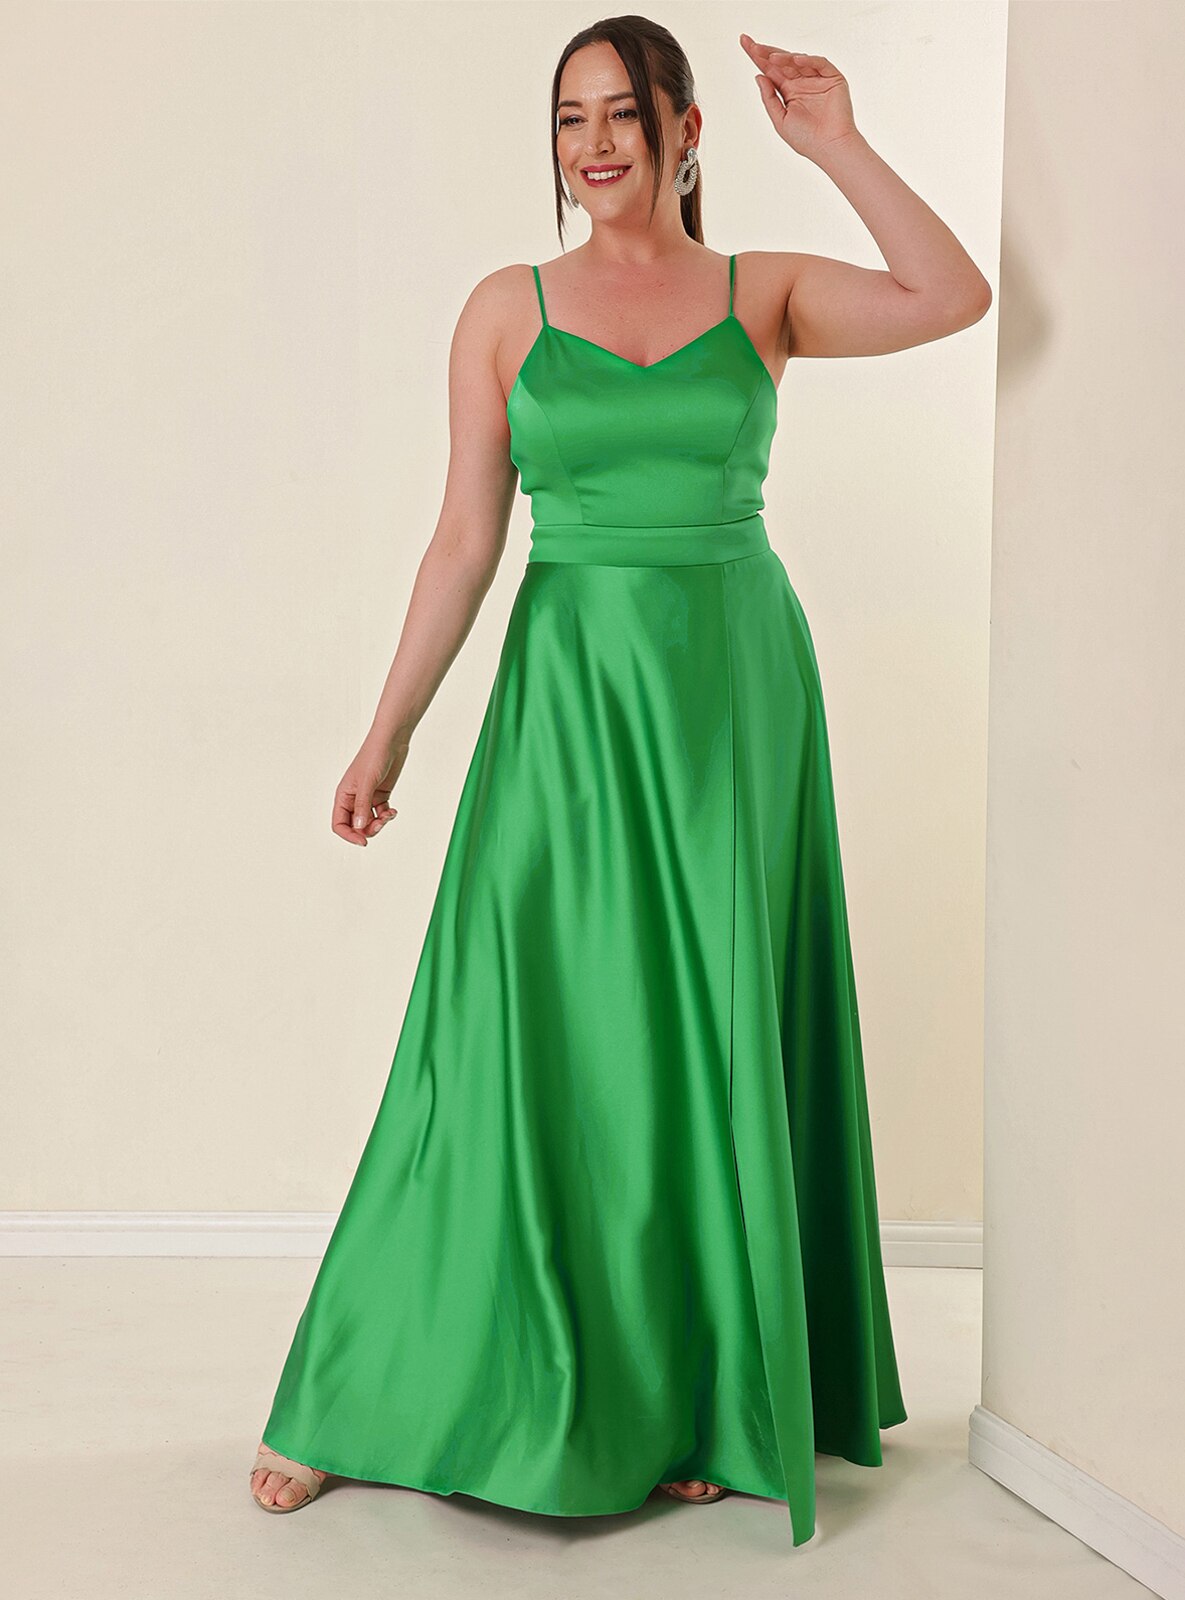 Green - Fully Lined - V neck Collar - Plus Size Evening Dress